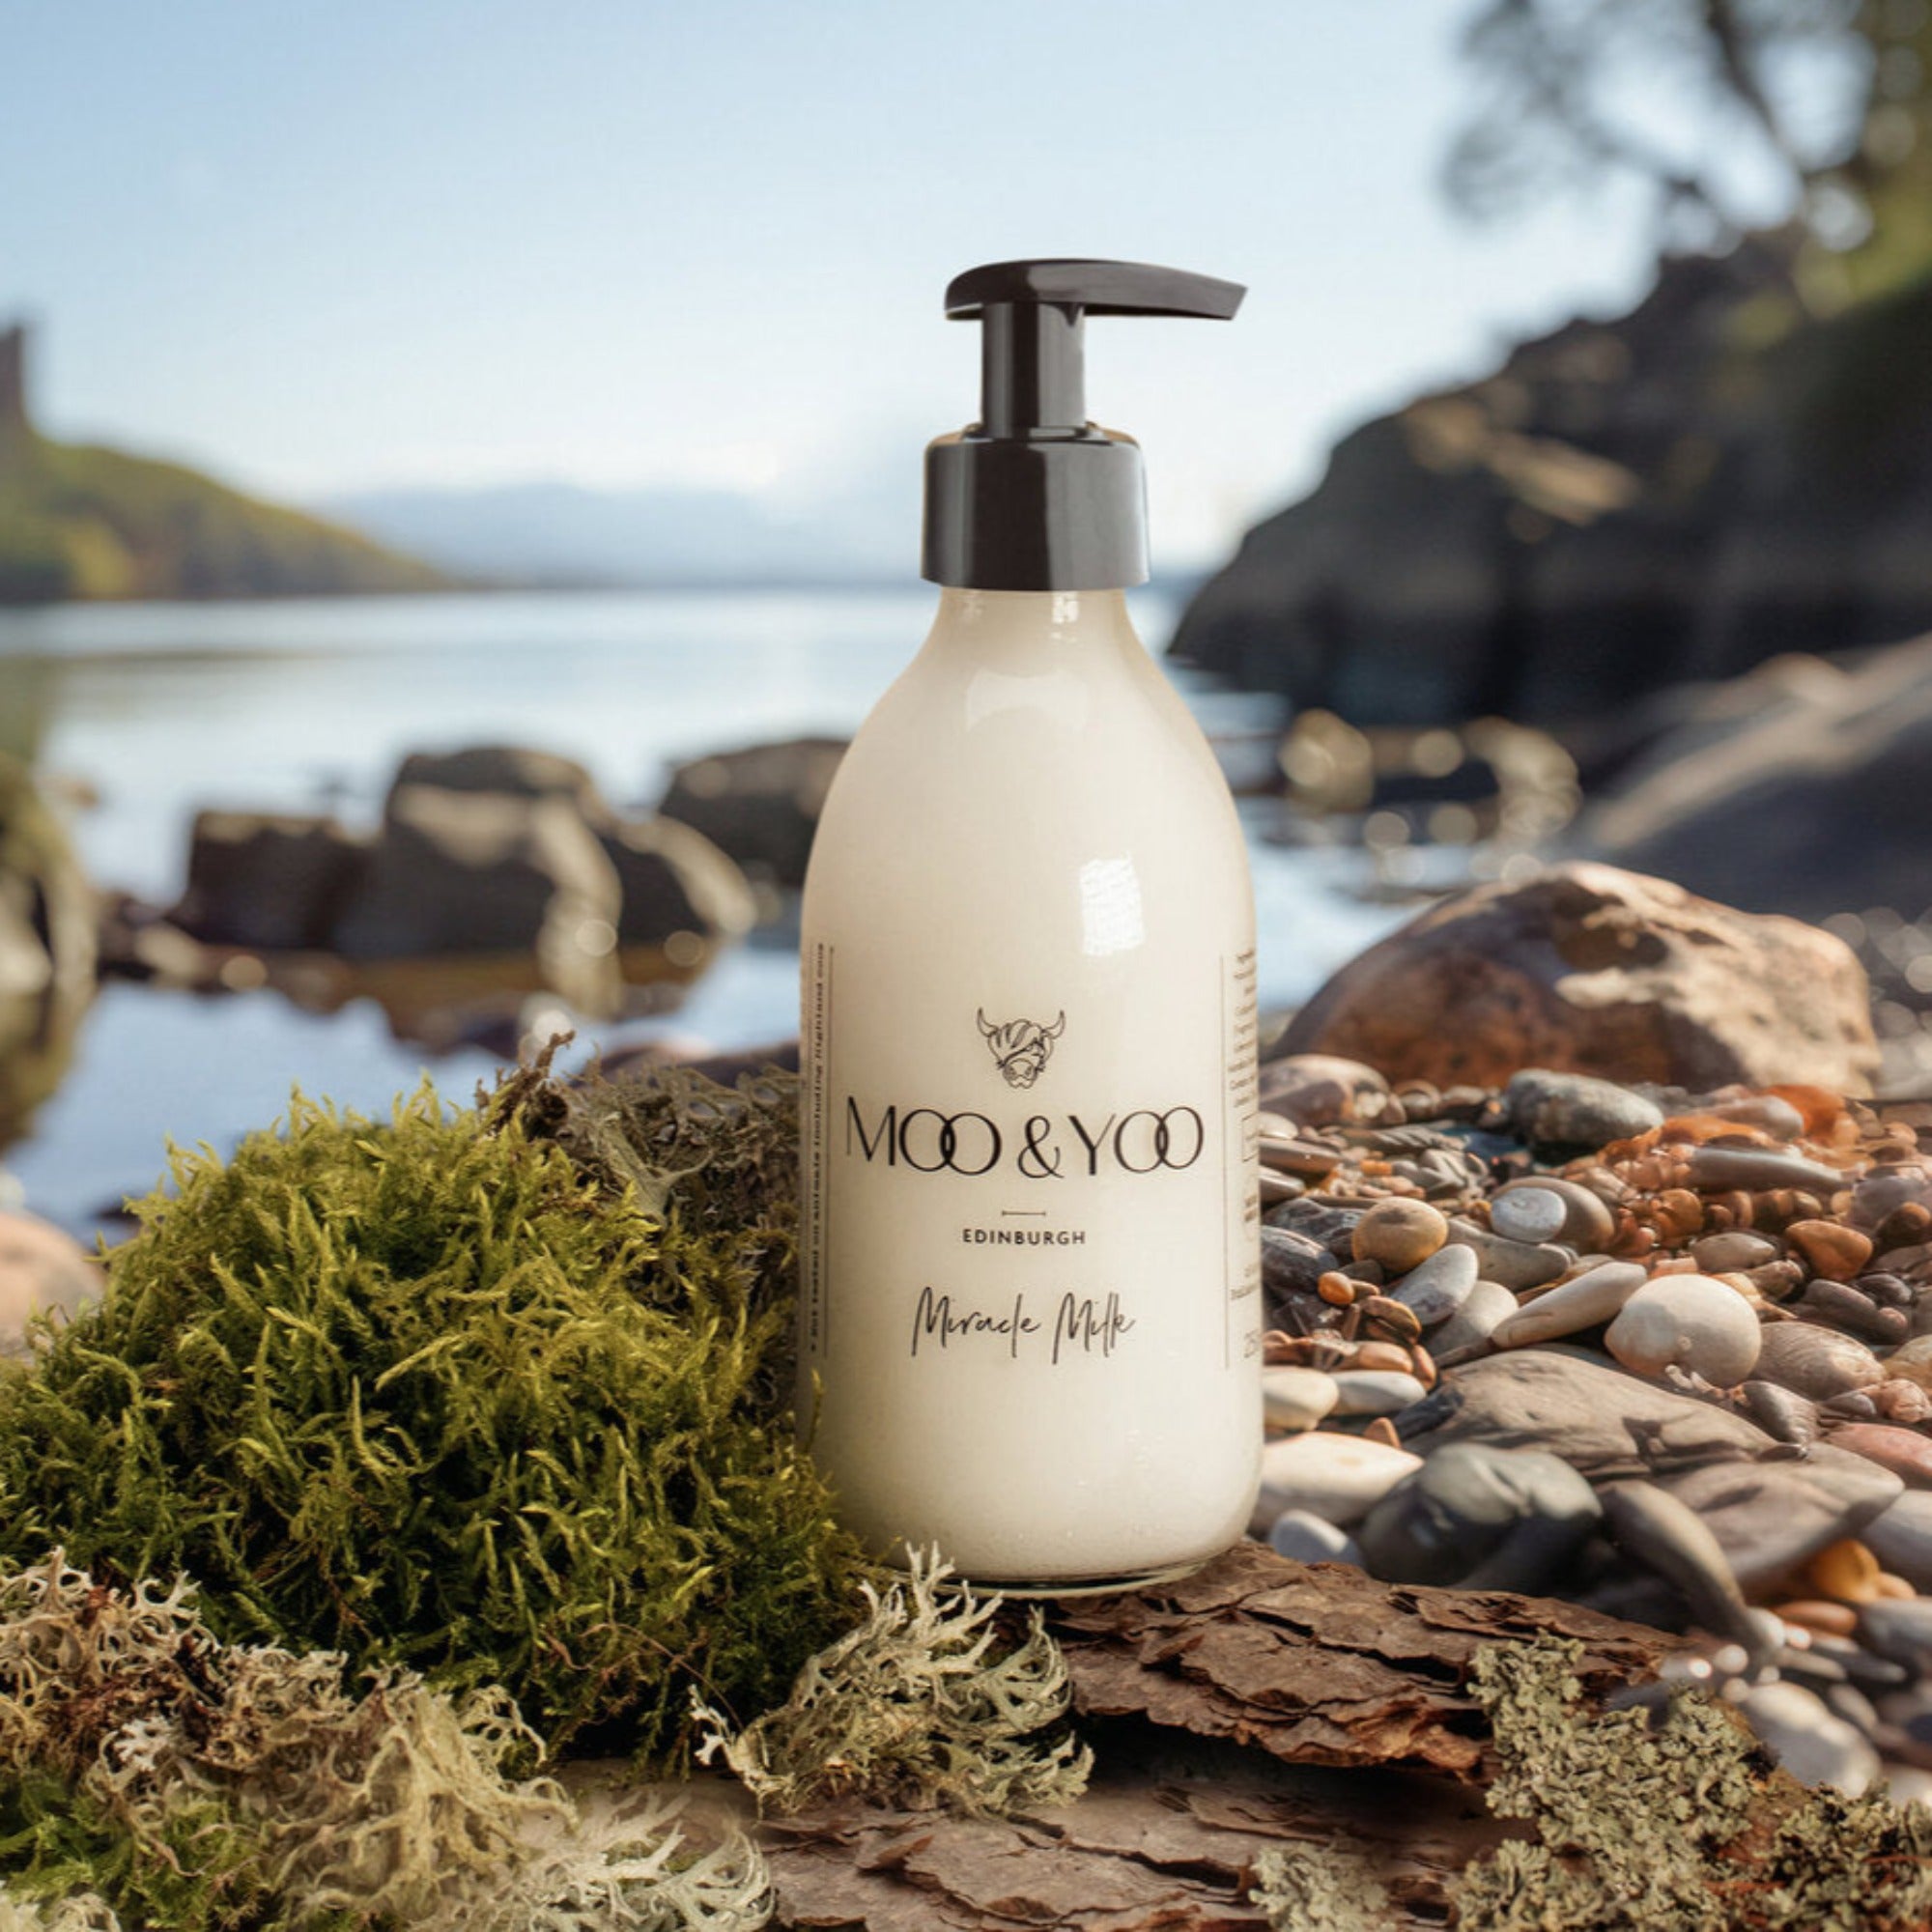 A glass bottle of Moo and Yoo Miracle Milk with a pump at the side of a Scottish Loch sitting on some pebbles and moss.